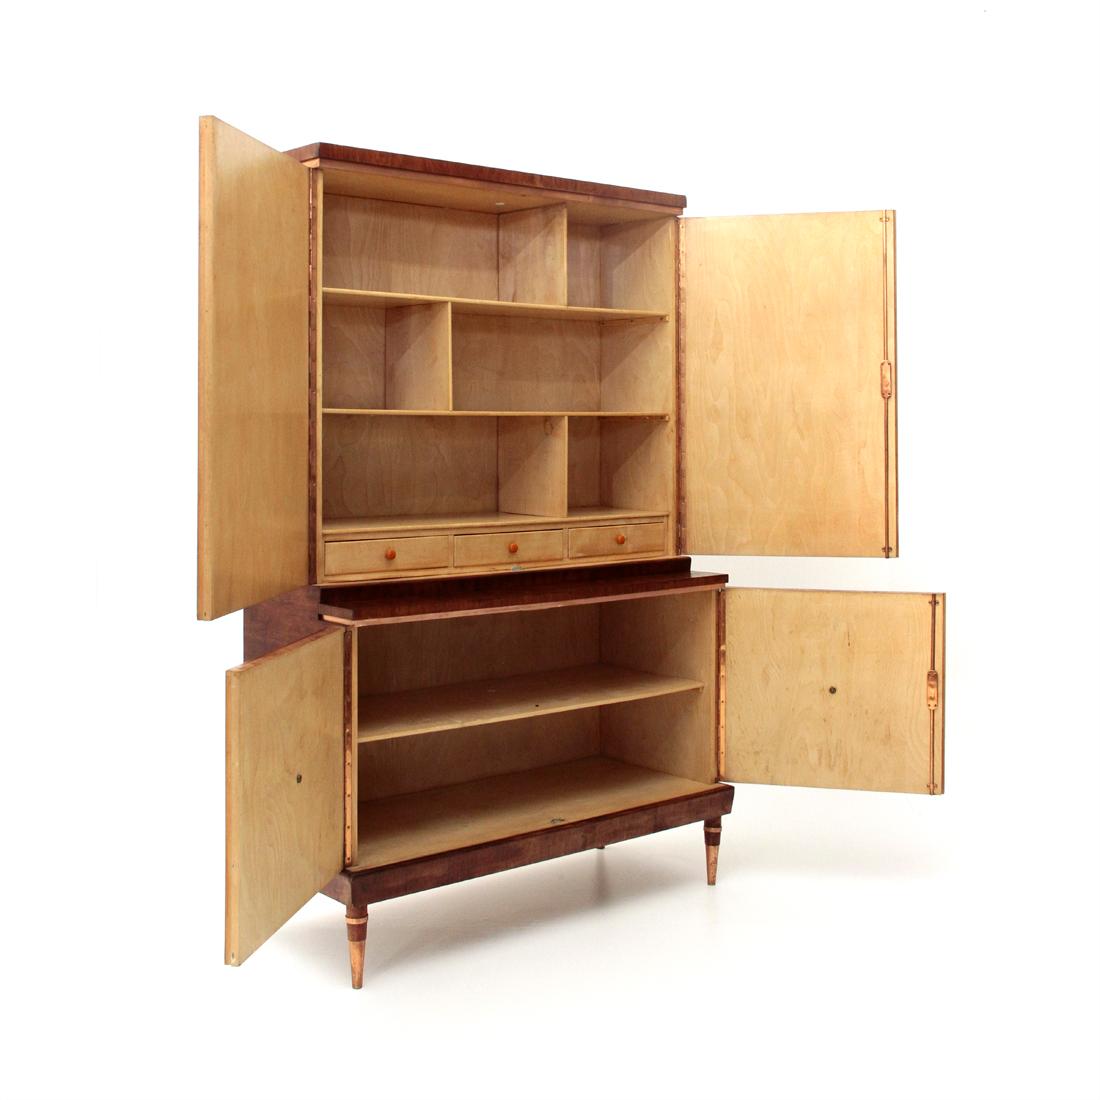 Mid-20th Century Modernist Cabinet with Copper Details, 1940s